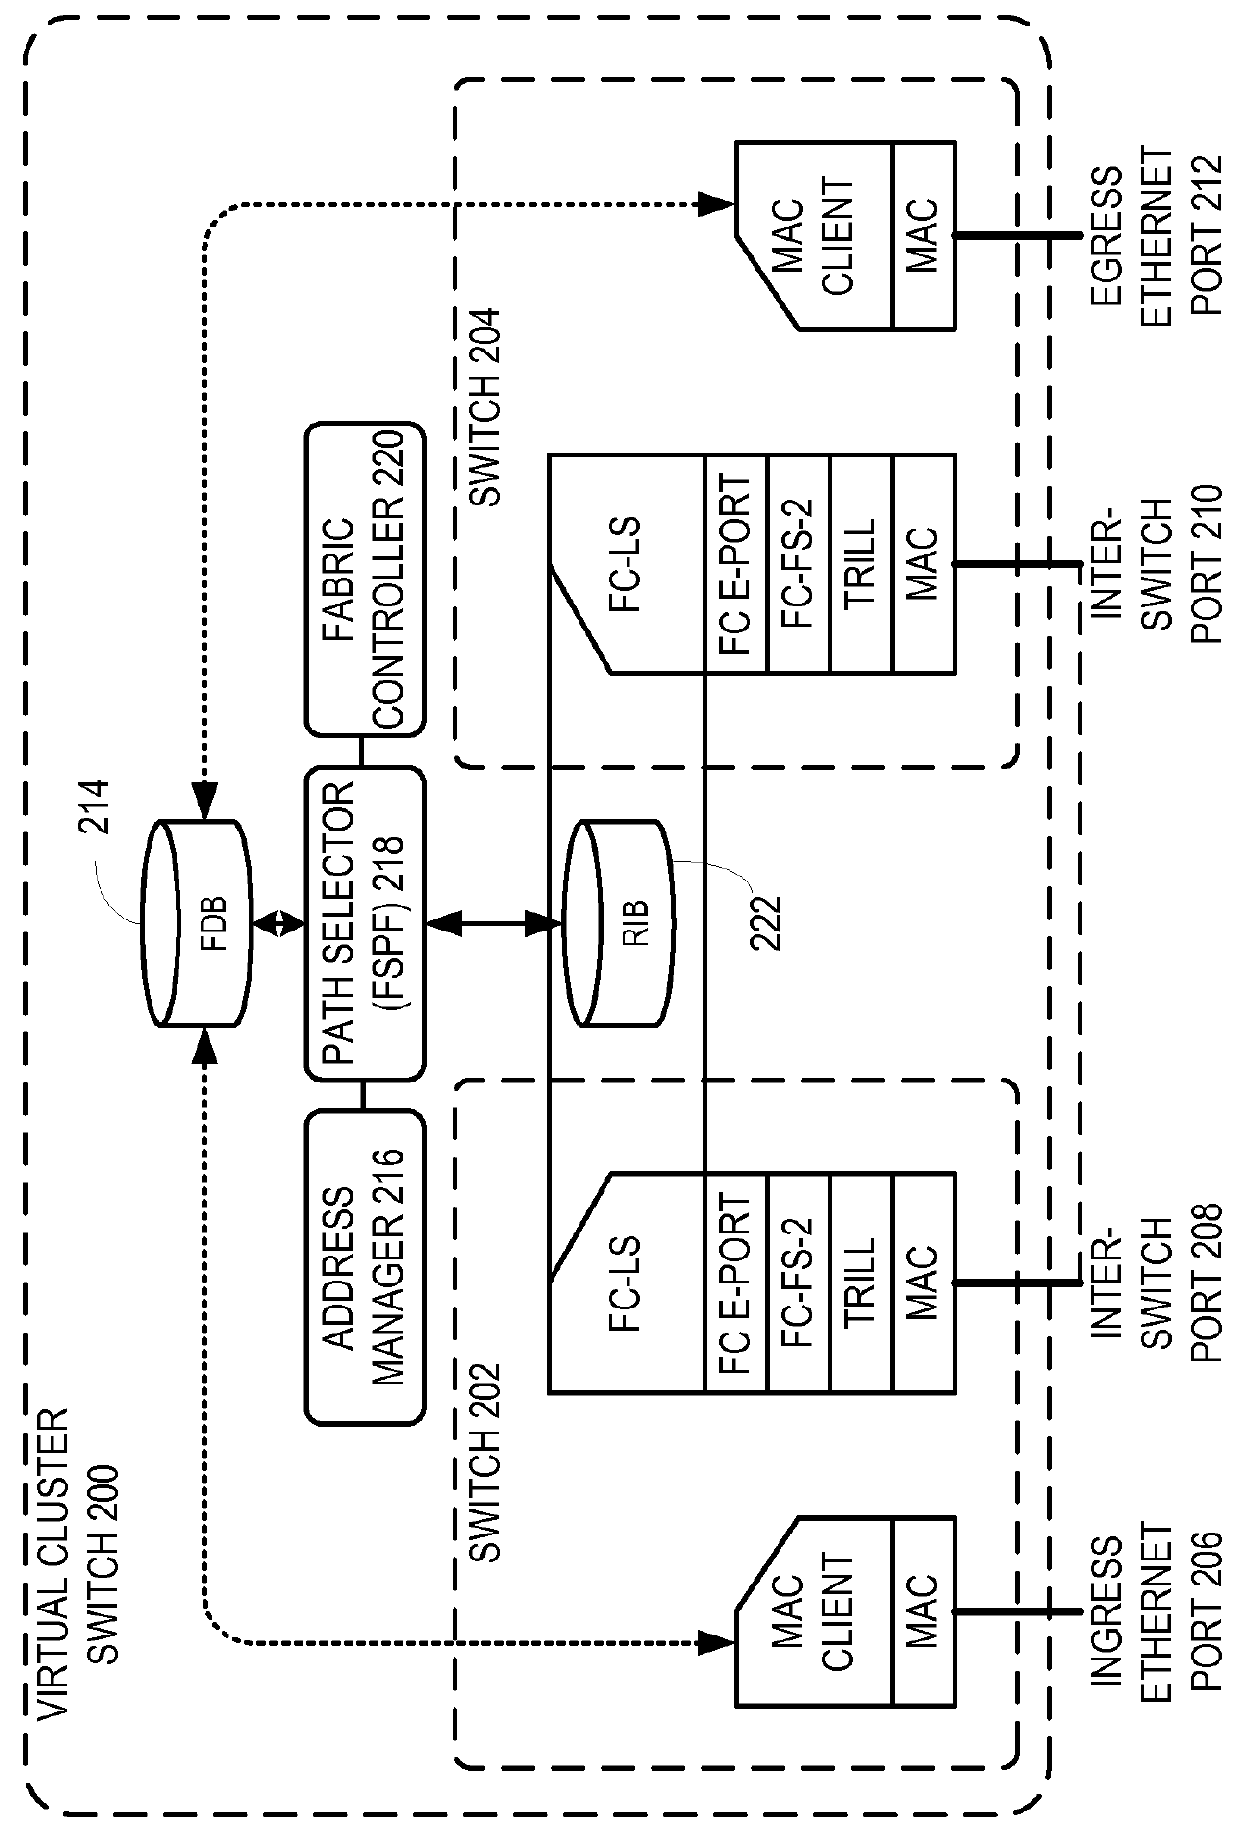 Traffic management for virtual cluster switching